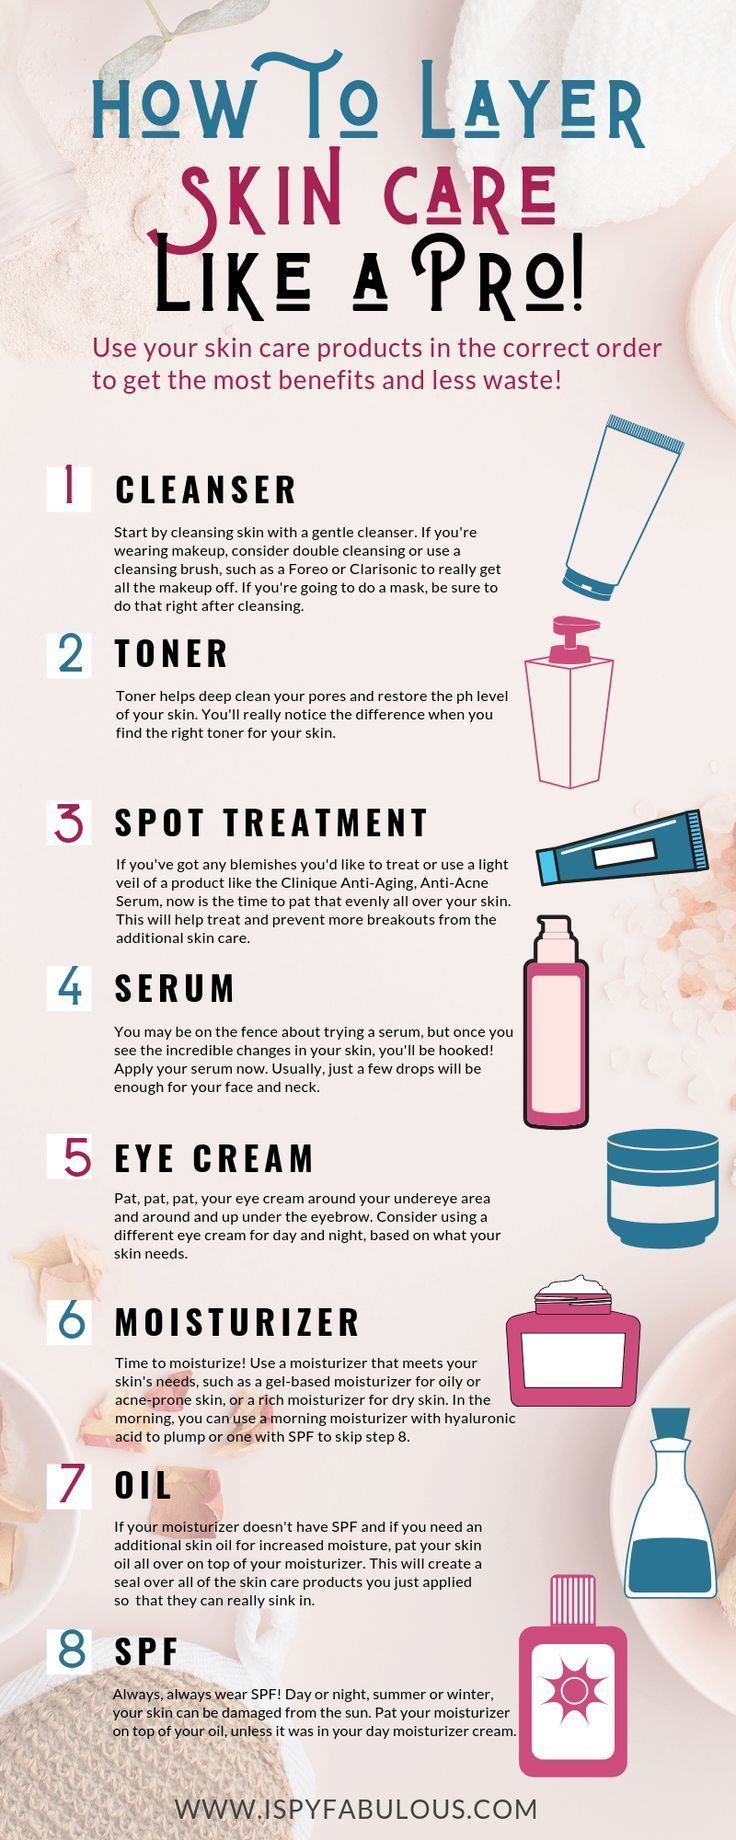 How To Layer Your Skin Care Like a Pro! - How To Layer Your Skin Care Like a Pro! -   9 beauty Products skin care ideas